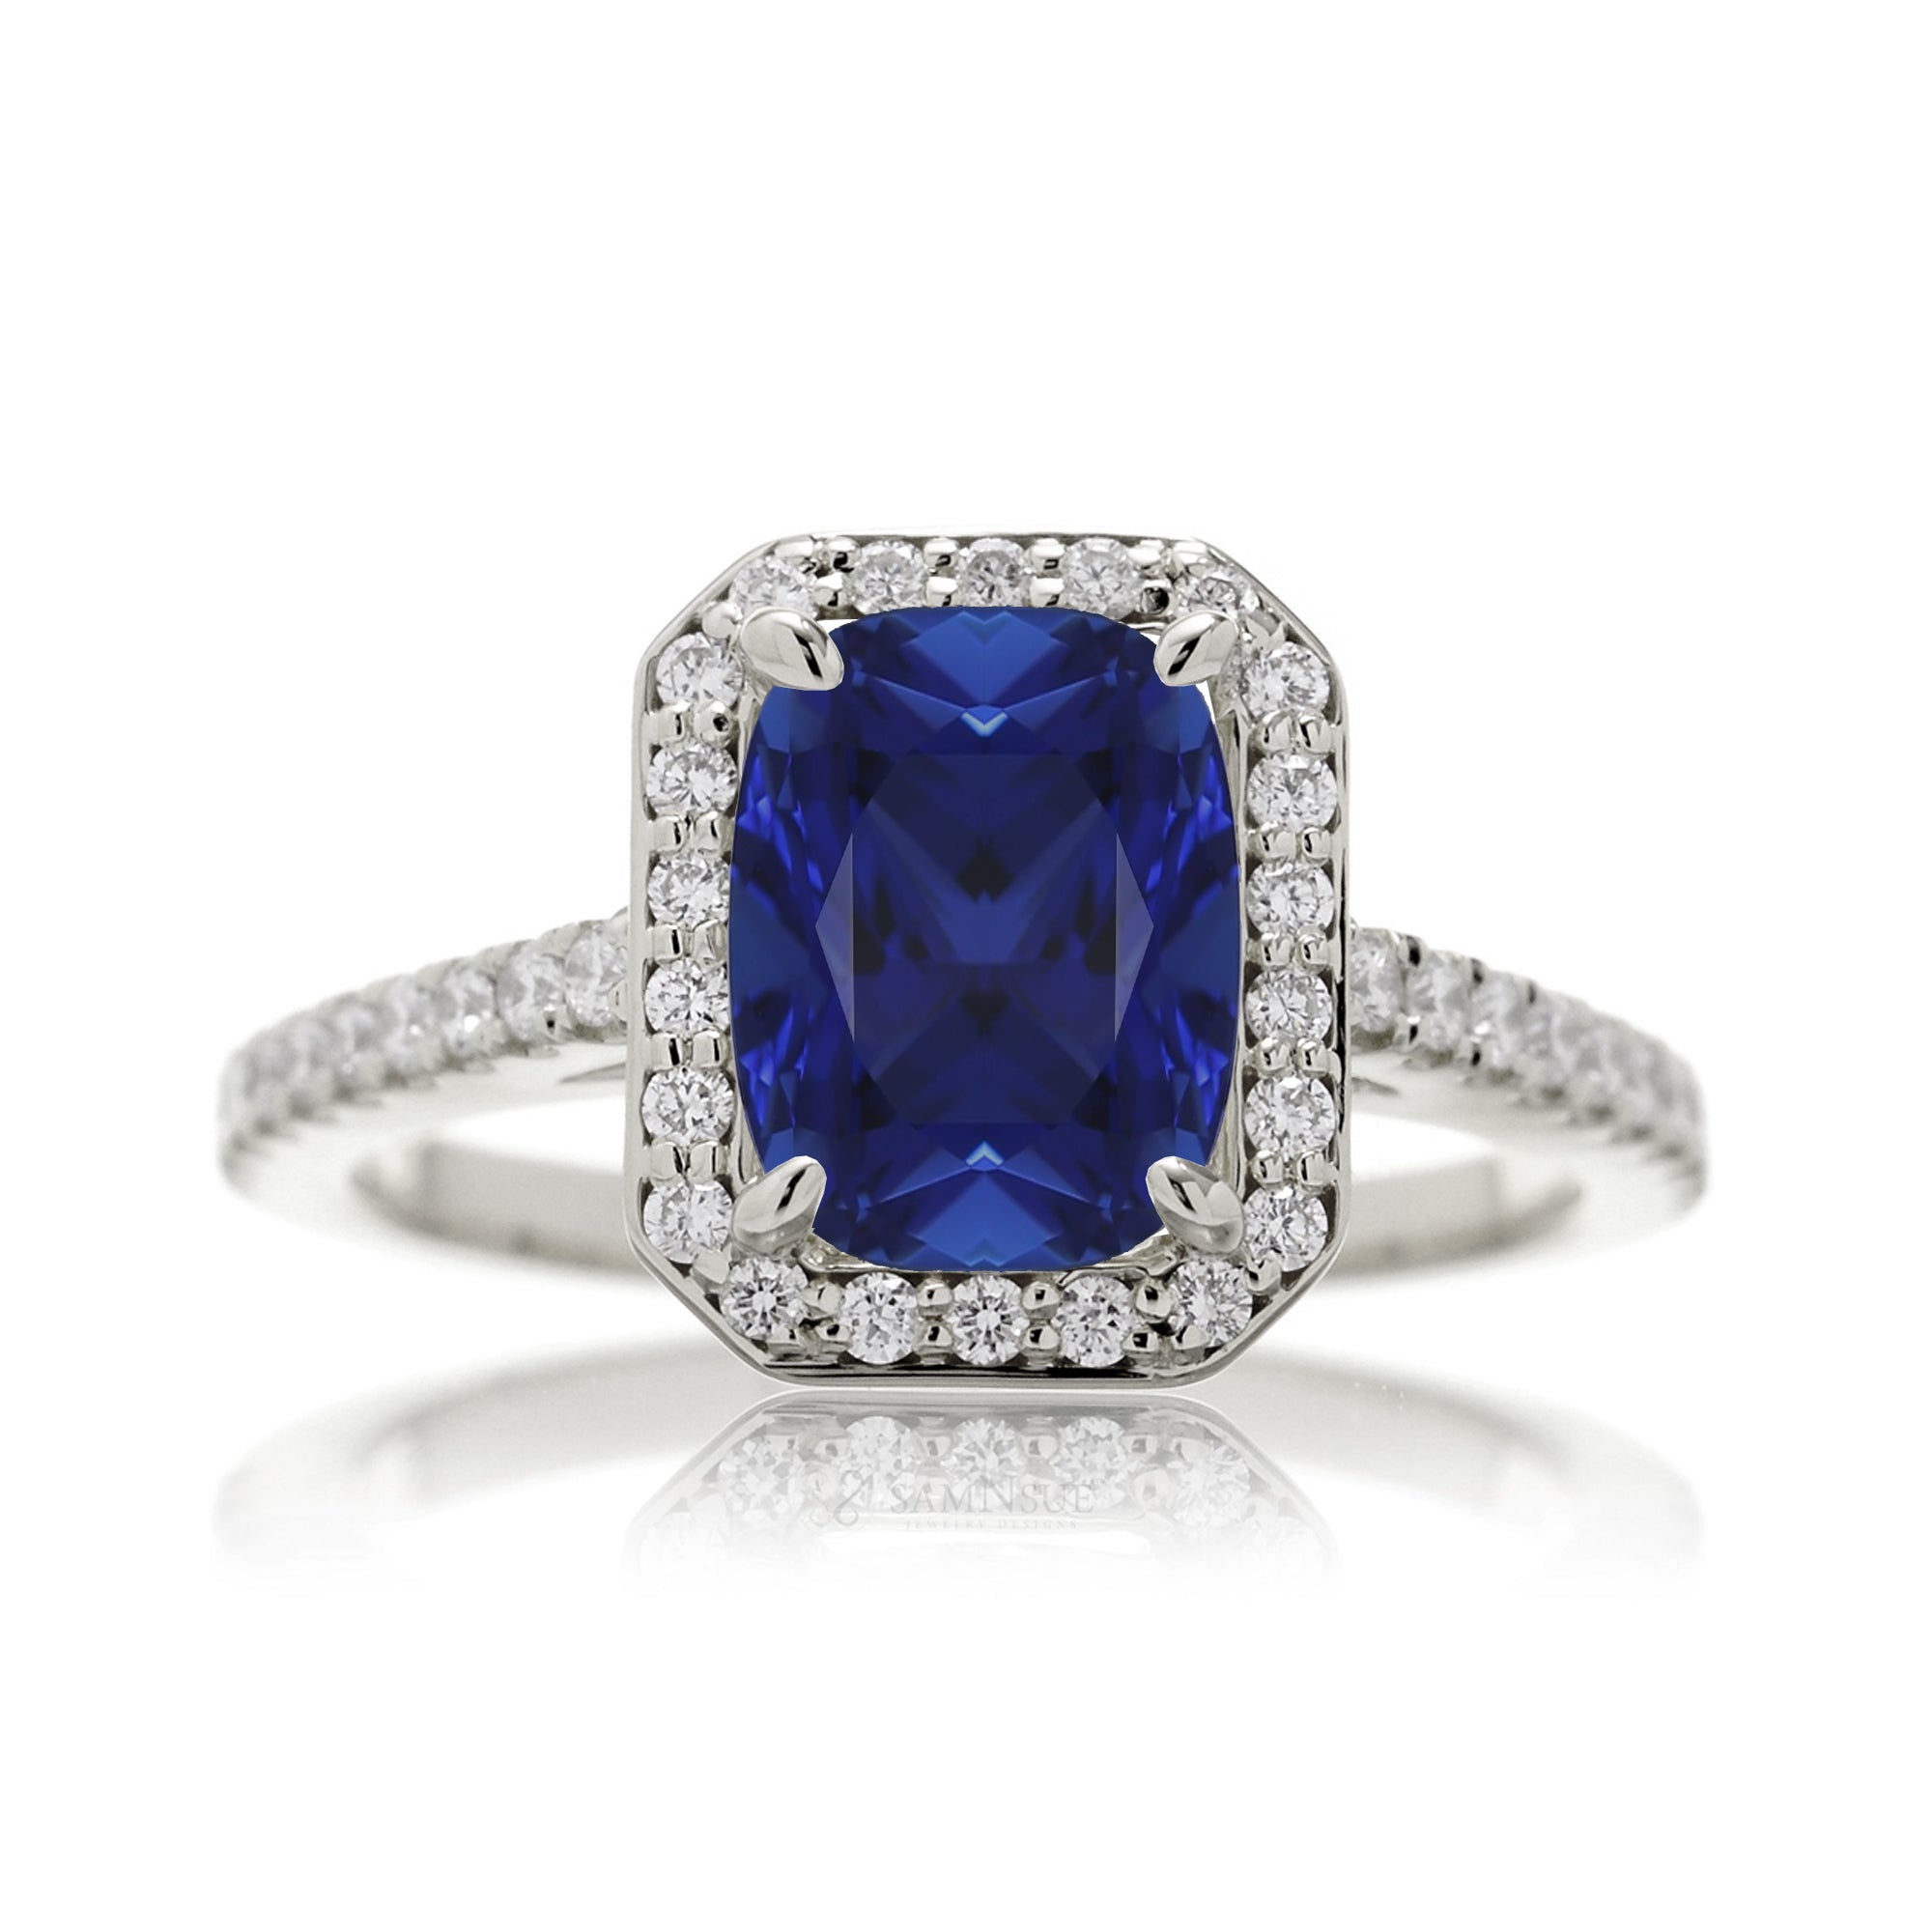 Cushion lab-grown sapphire diamond halo cathedral engagement ring - the Steffy white gold